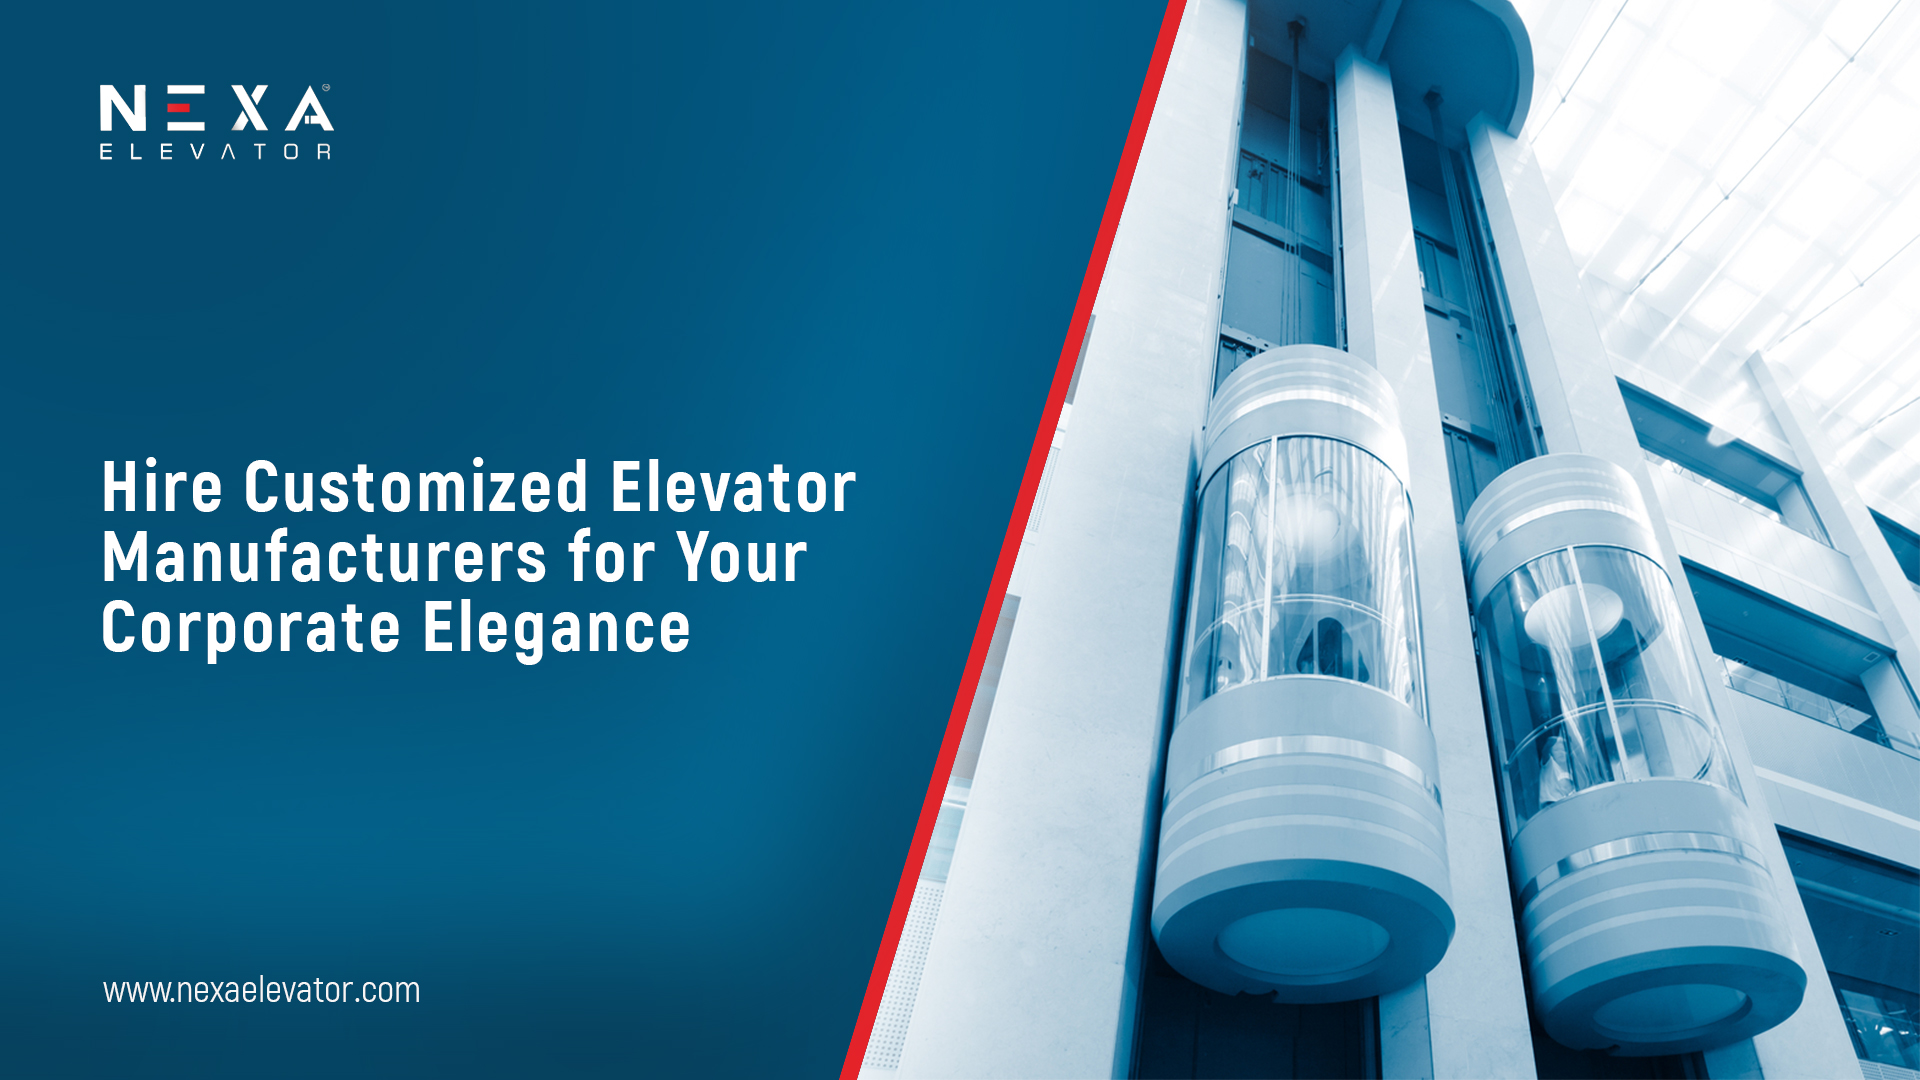 Hire Customized Elevator Manufacturers for Your Corporate Elegance